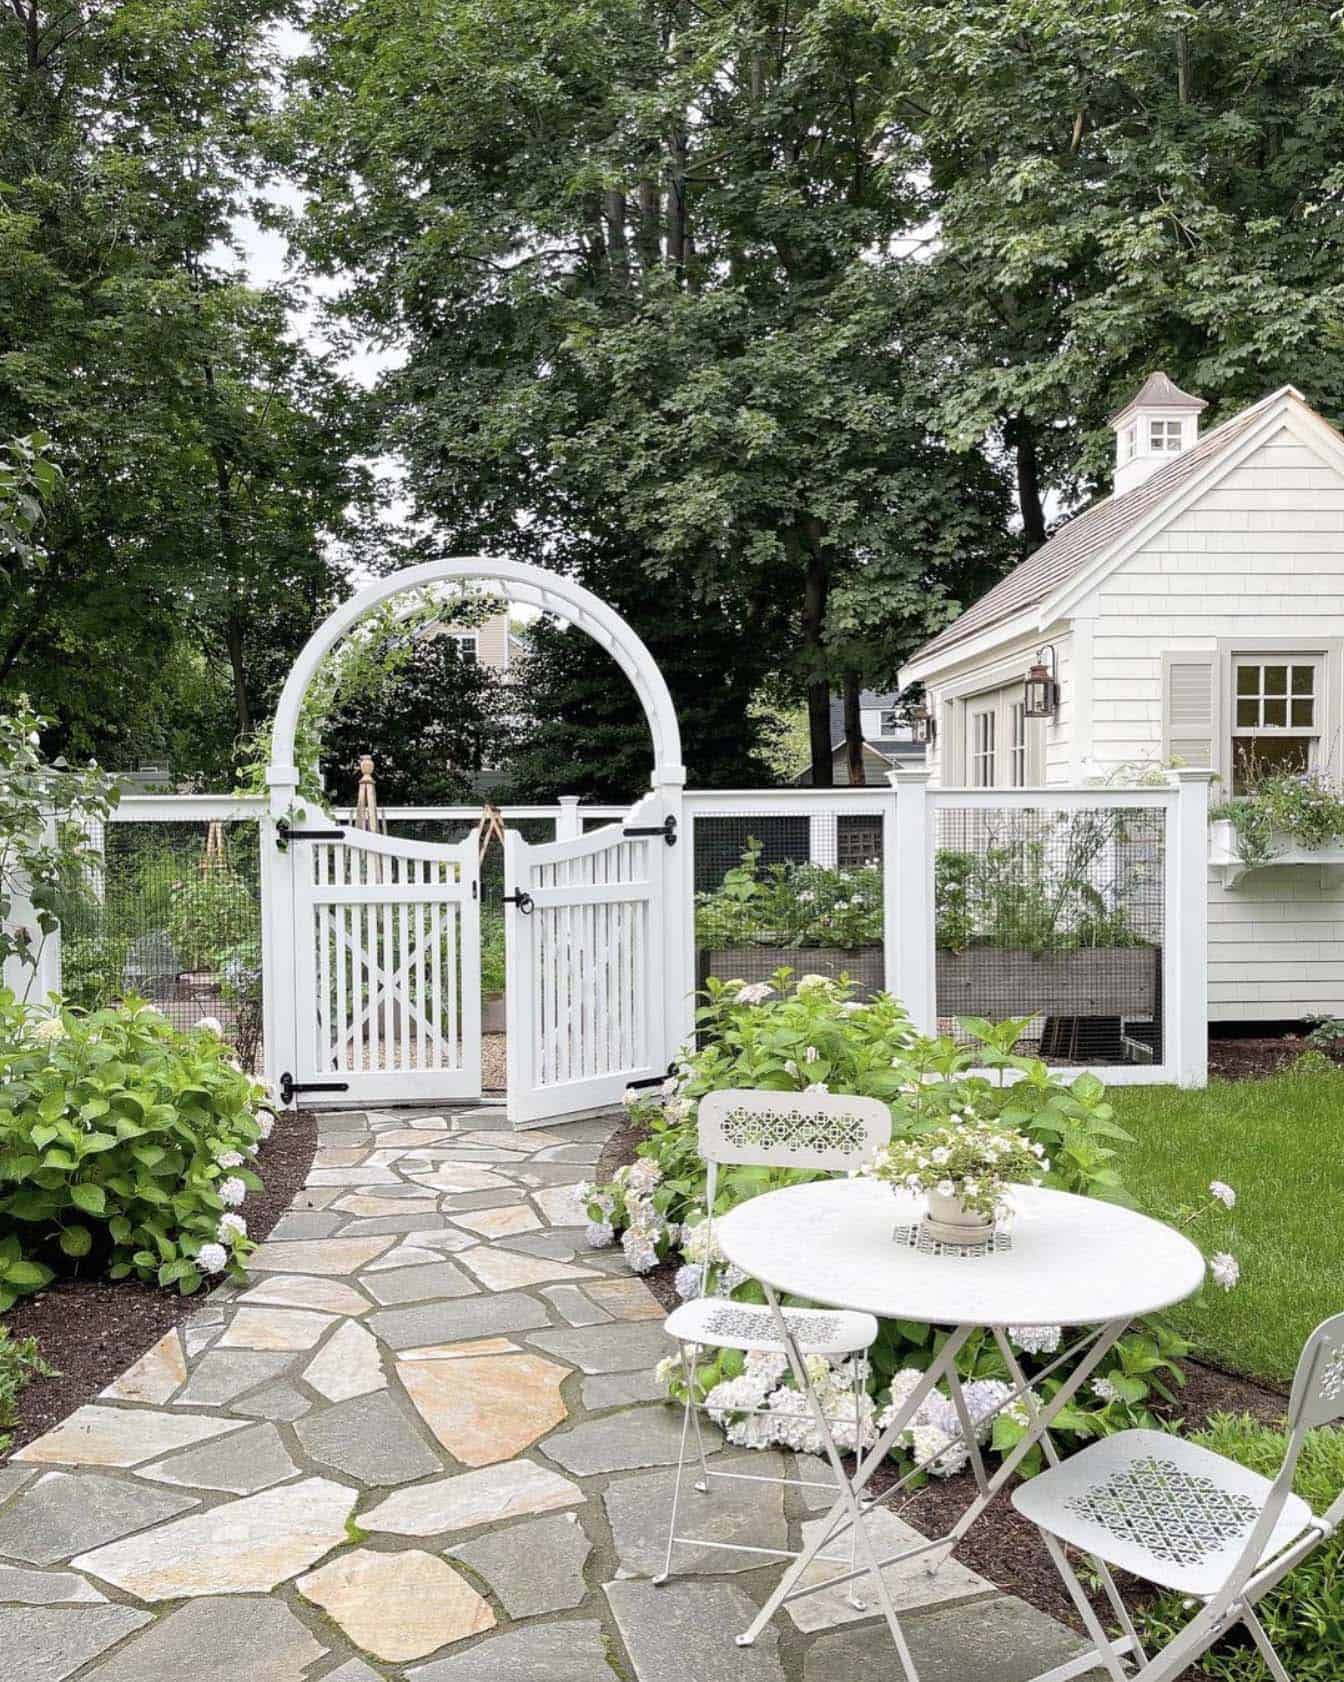 garden fence and arched trellis gate leads to backyard garden and home office shed